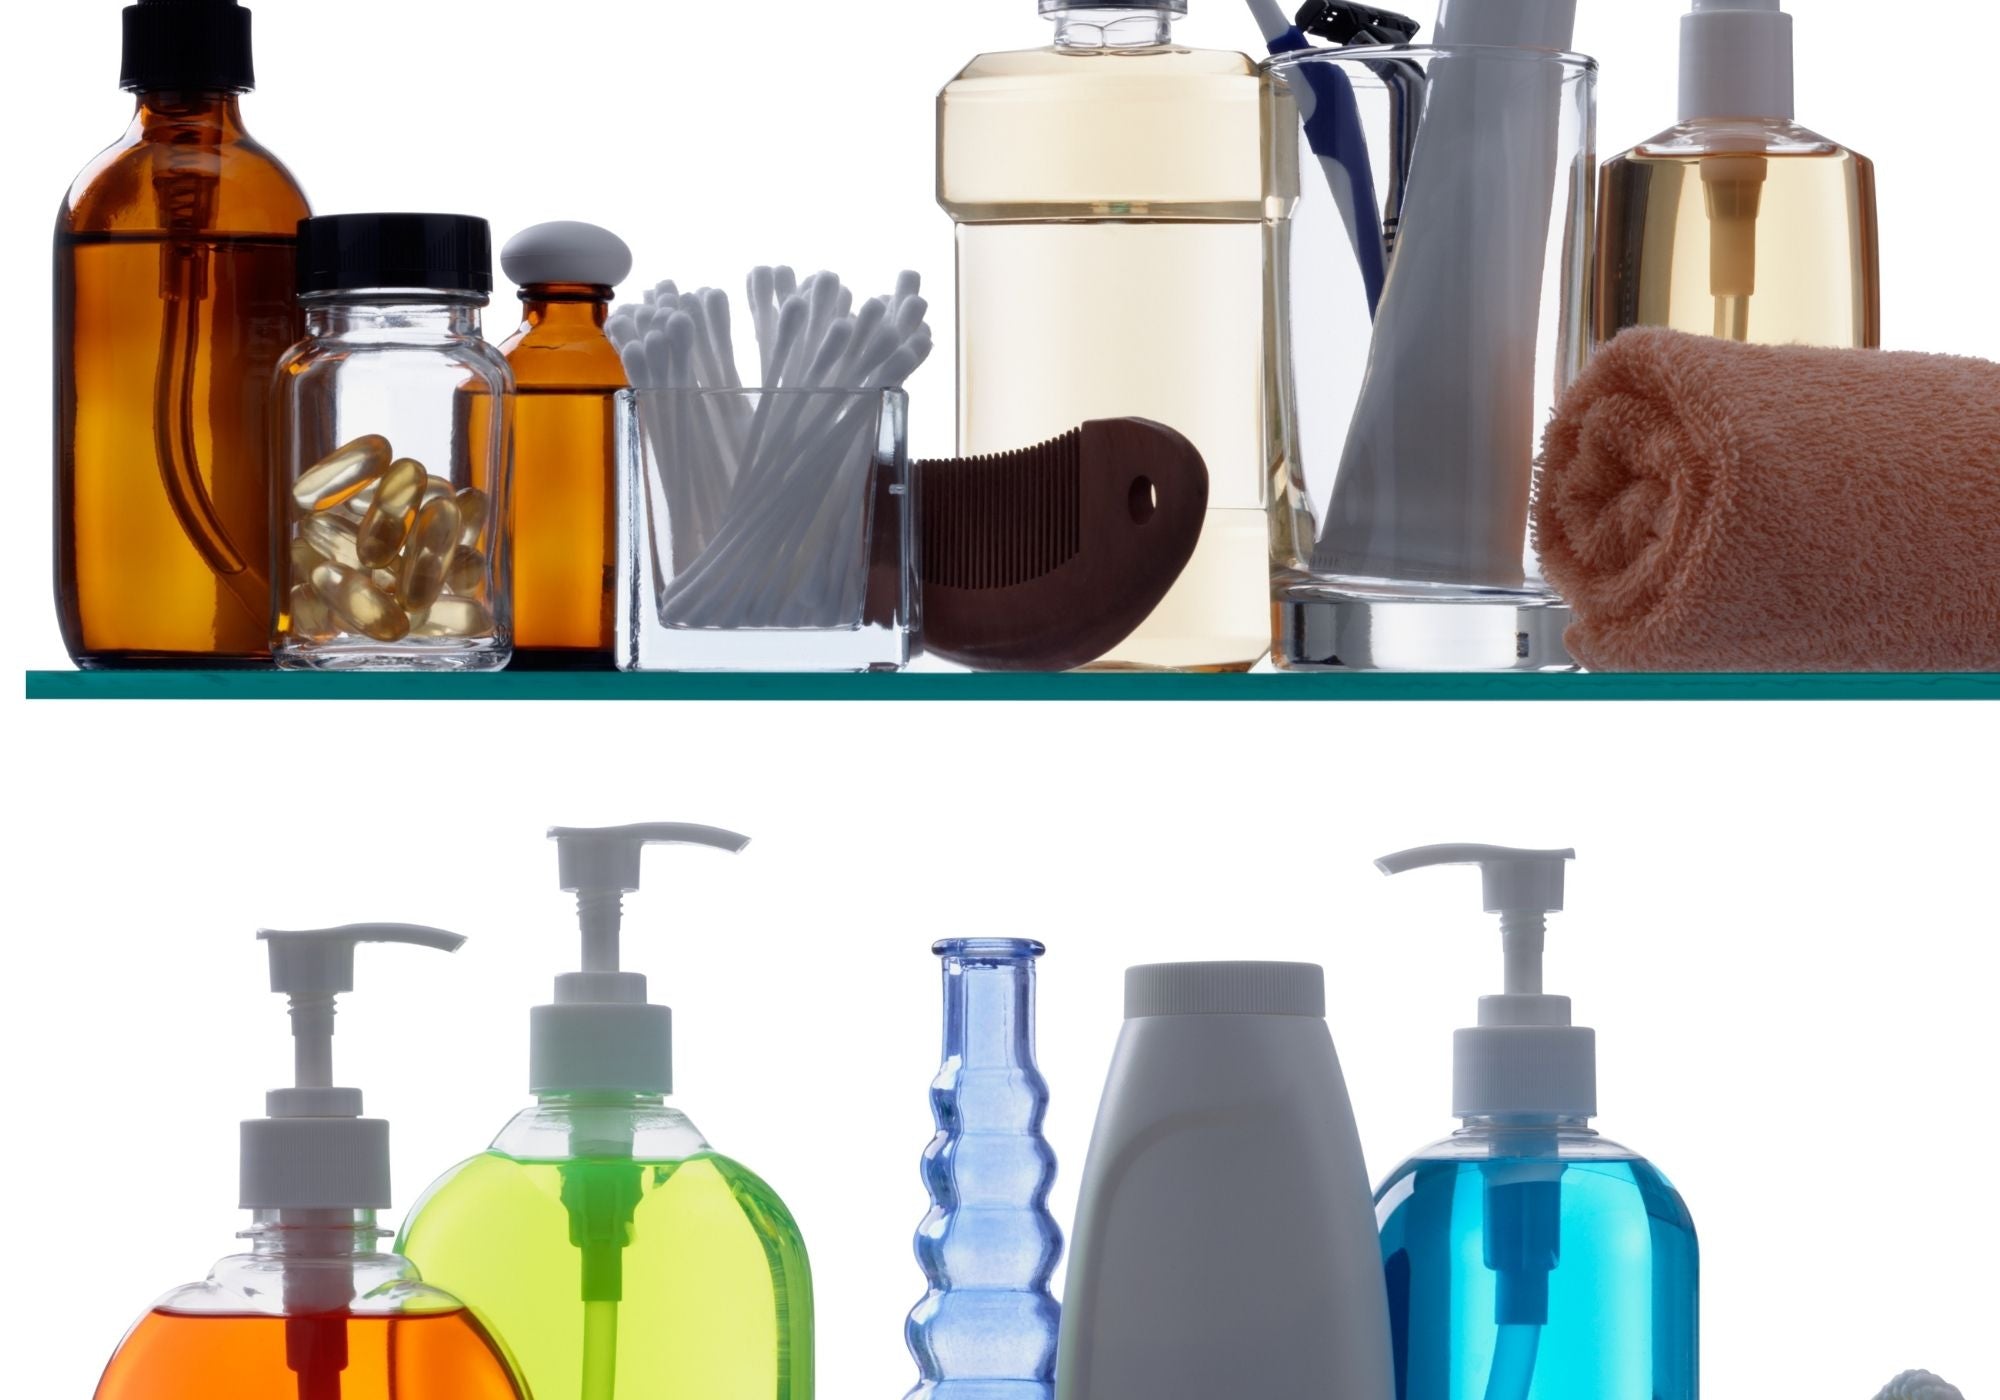 How to eliminate harmful toxins from your bathroom when you are TTC